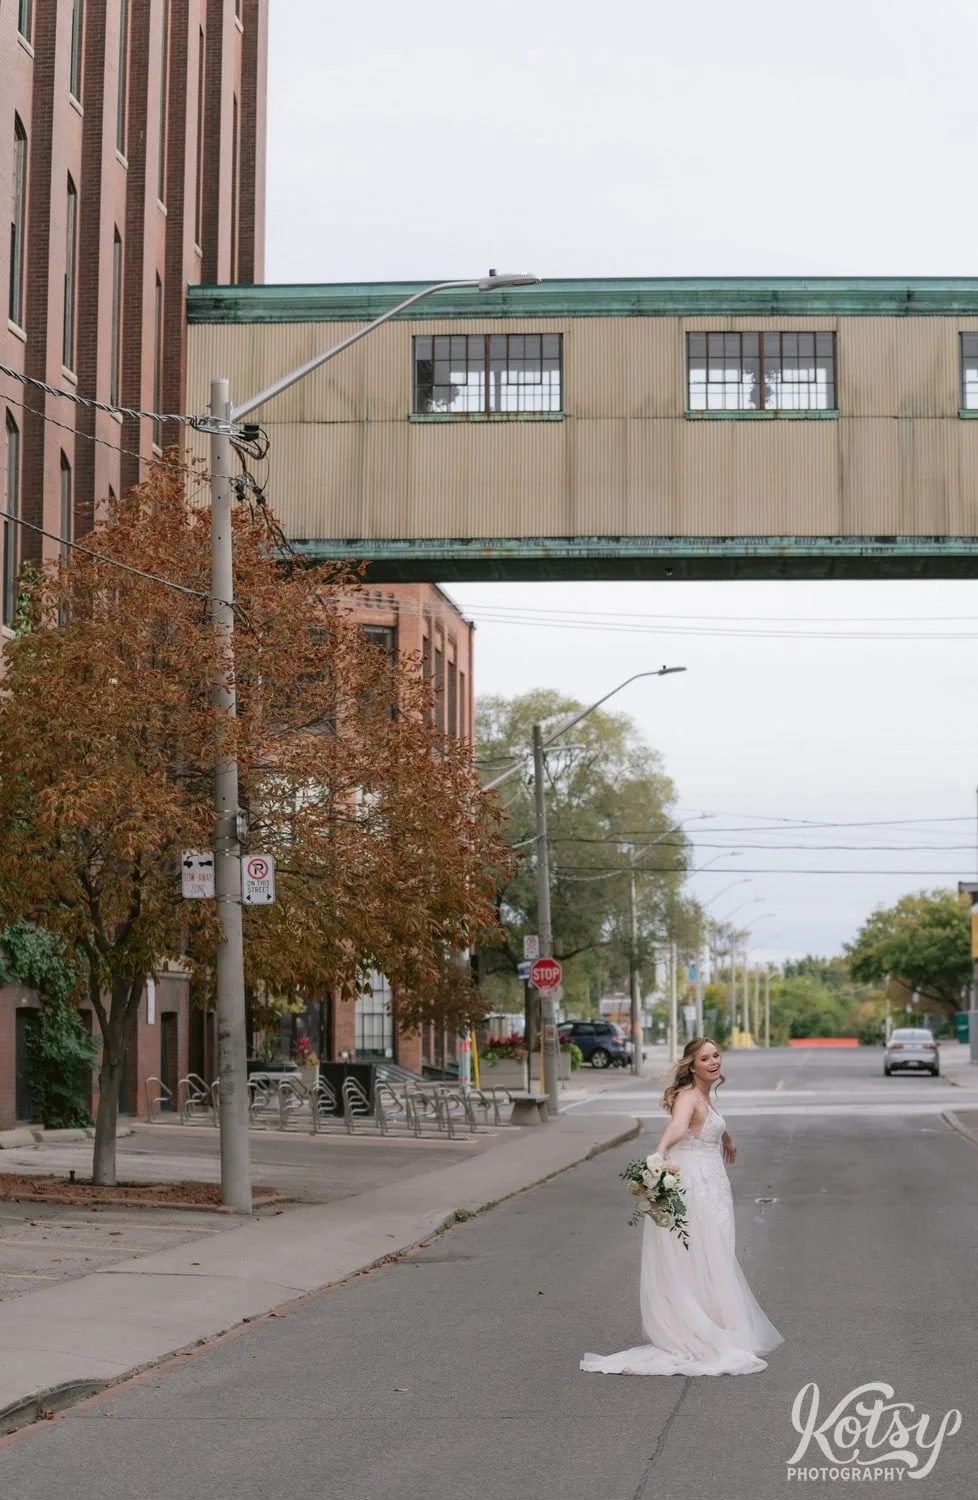 A bride wearing a white bridal gown and holding a bouquet of flowers looks back at the camera well laughing and standing in the middle of a empty road beside the carpet factory with pedestrian bridge in Toronto Canada